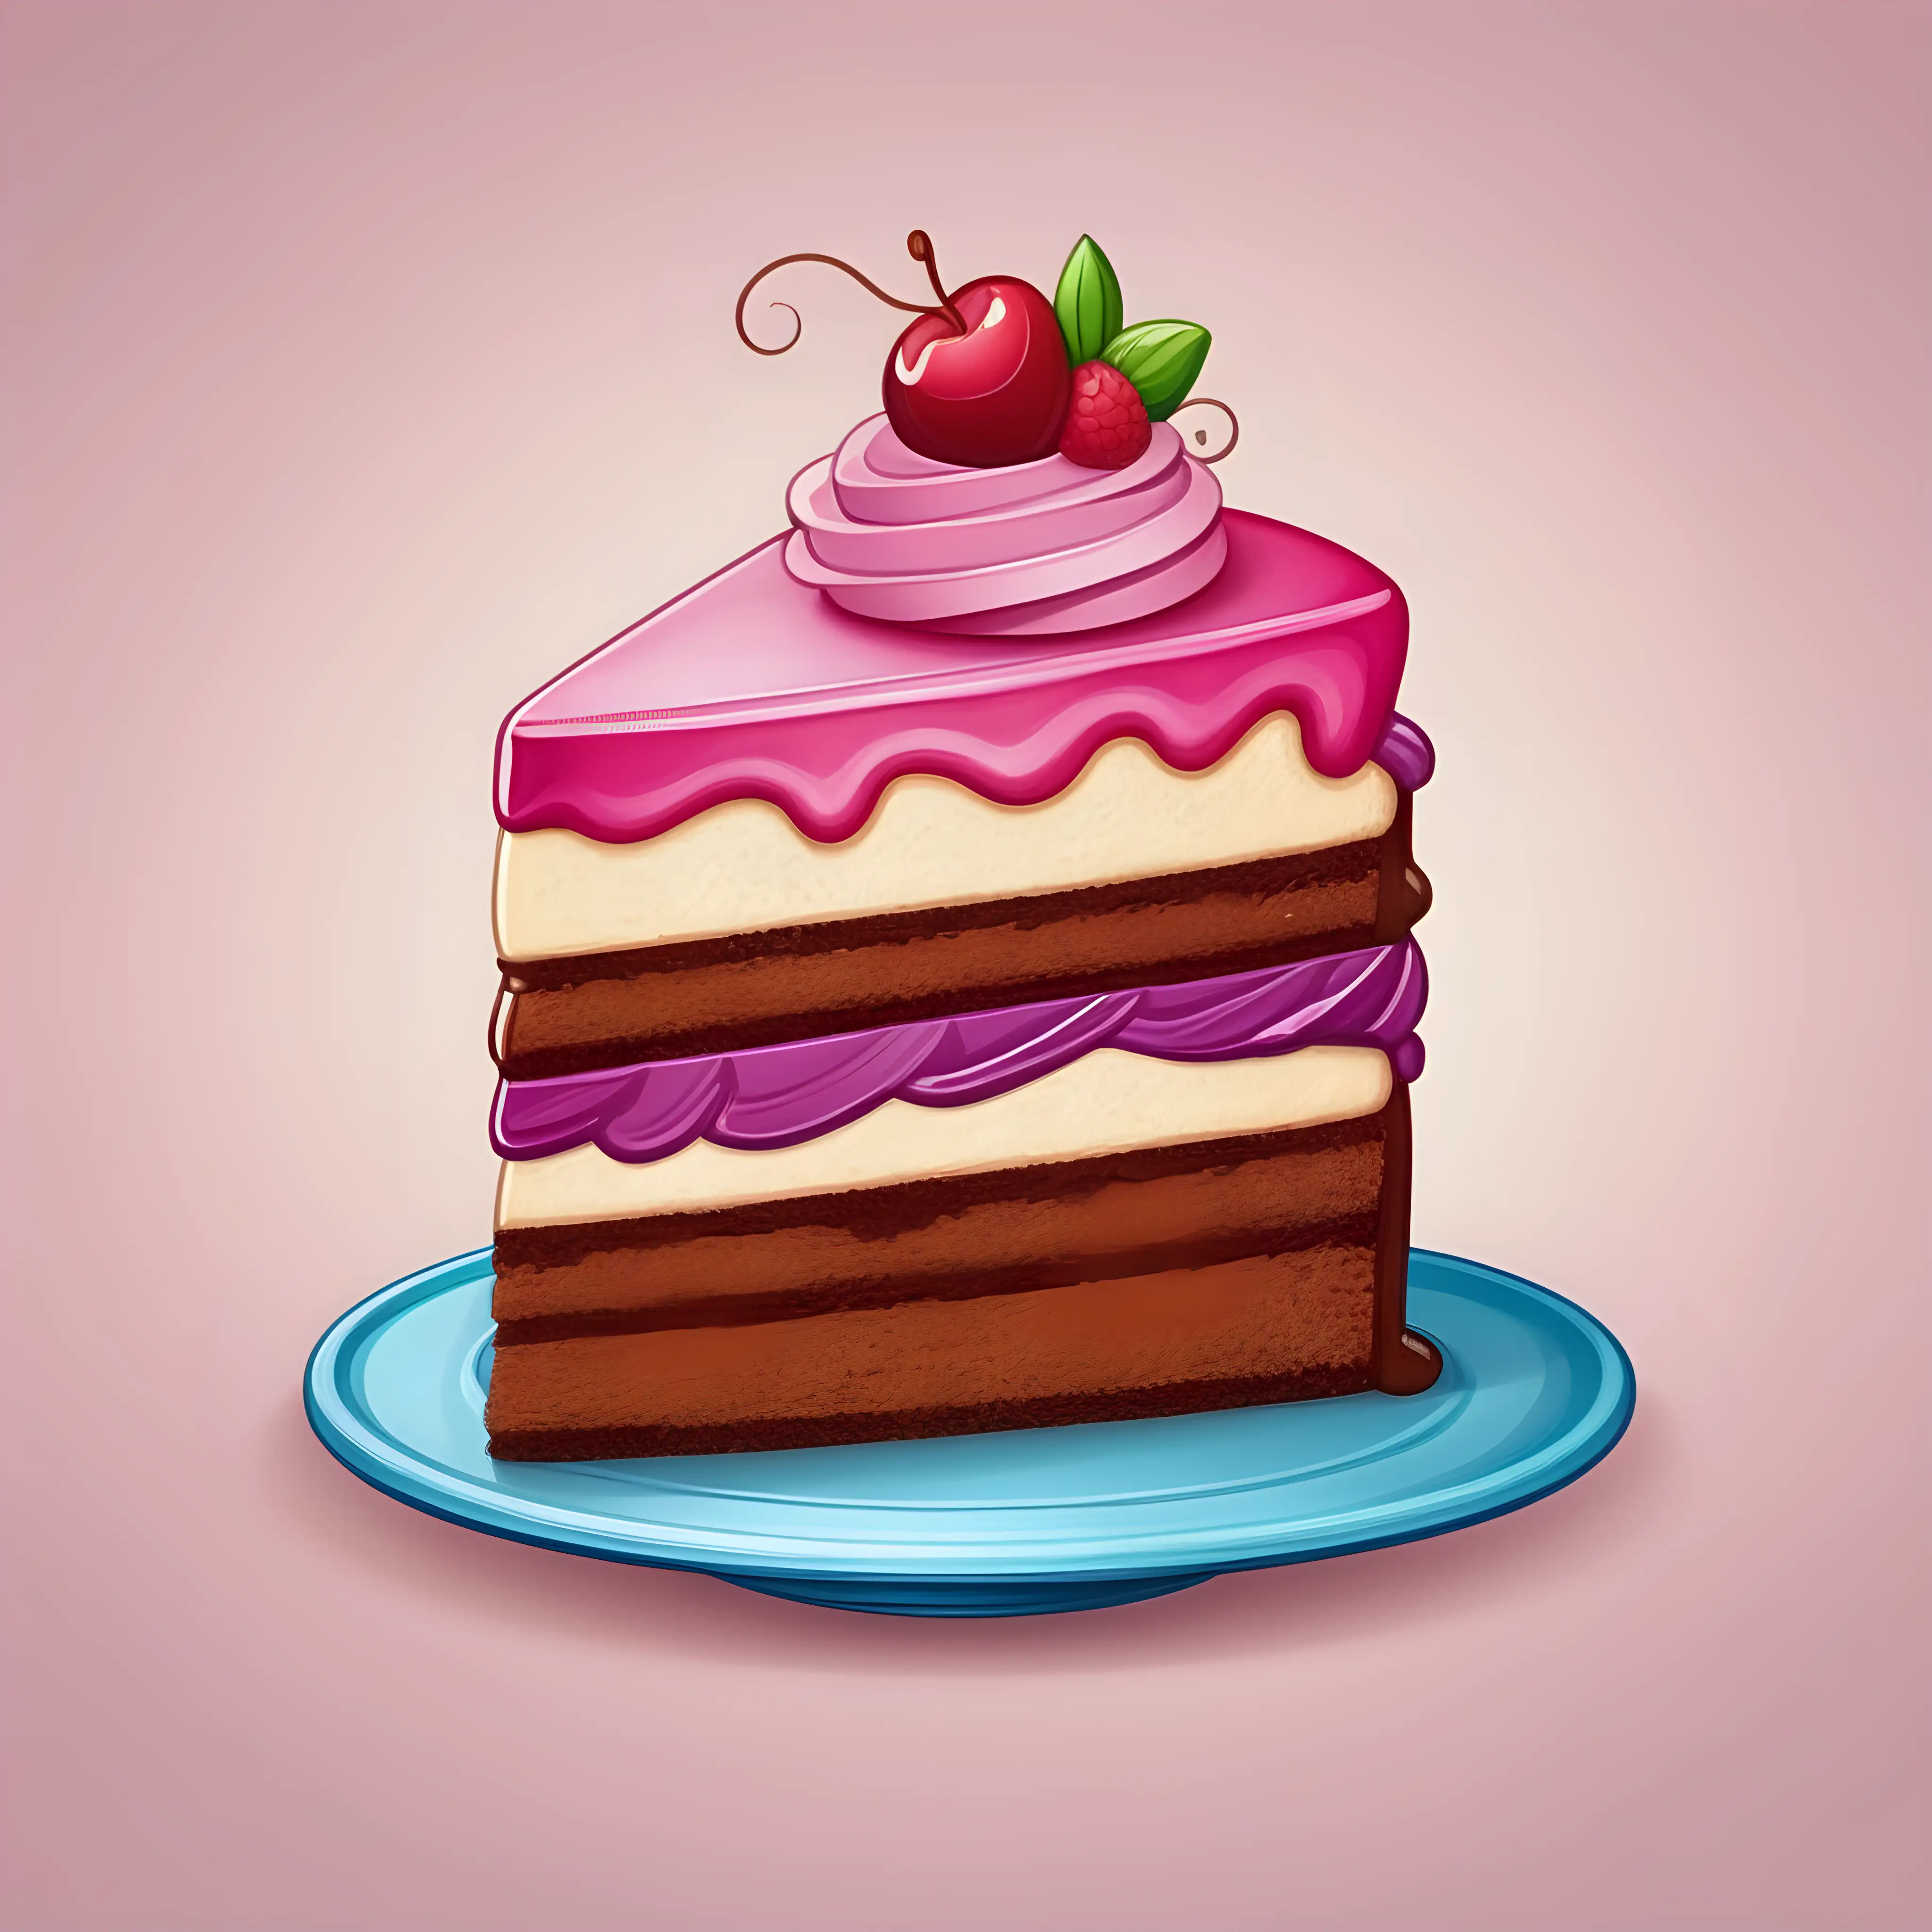 create icon of a piece of cake cartoon style

